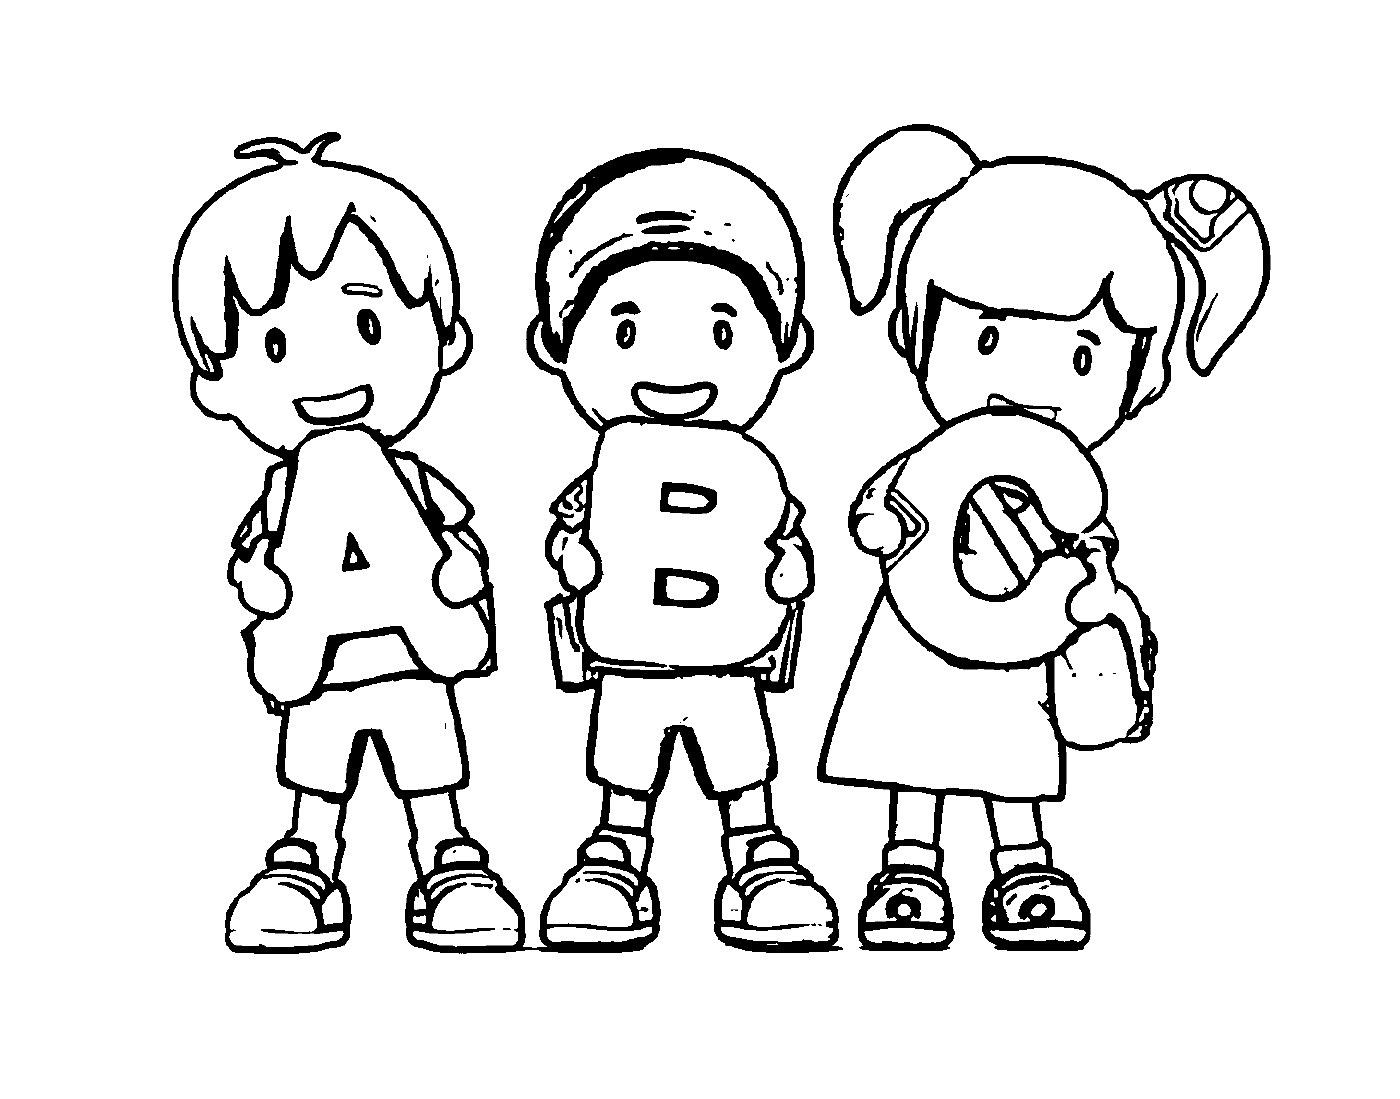  Children with ABC letters 